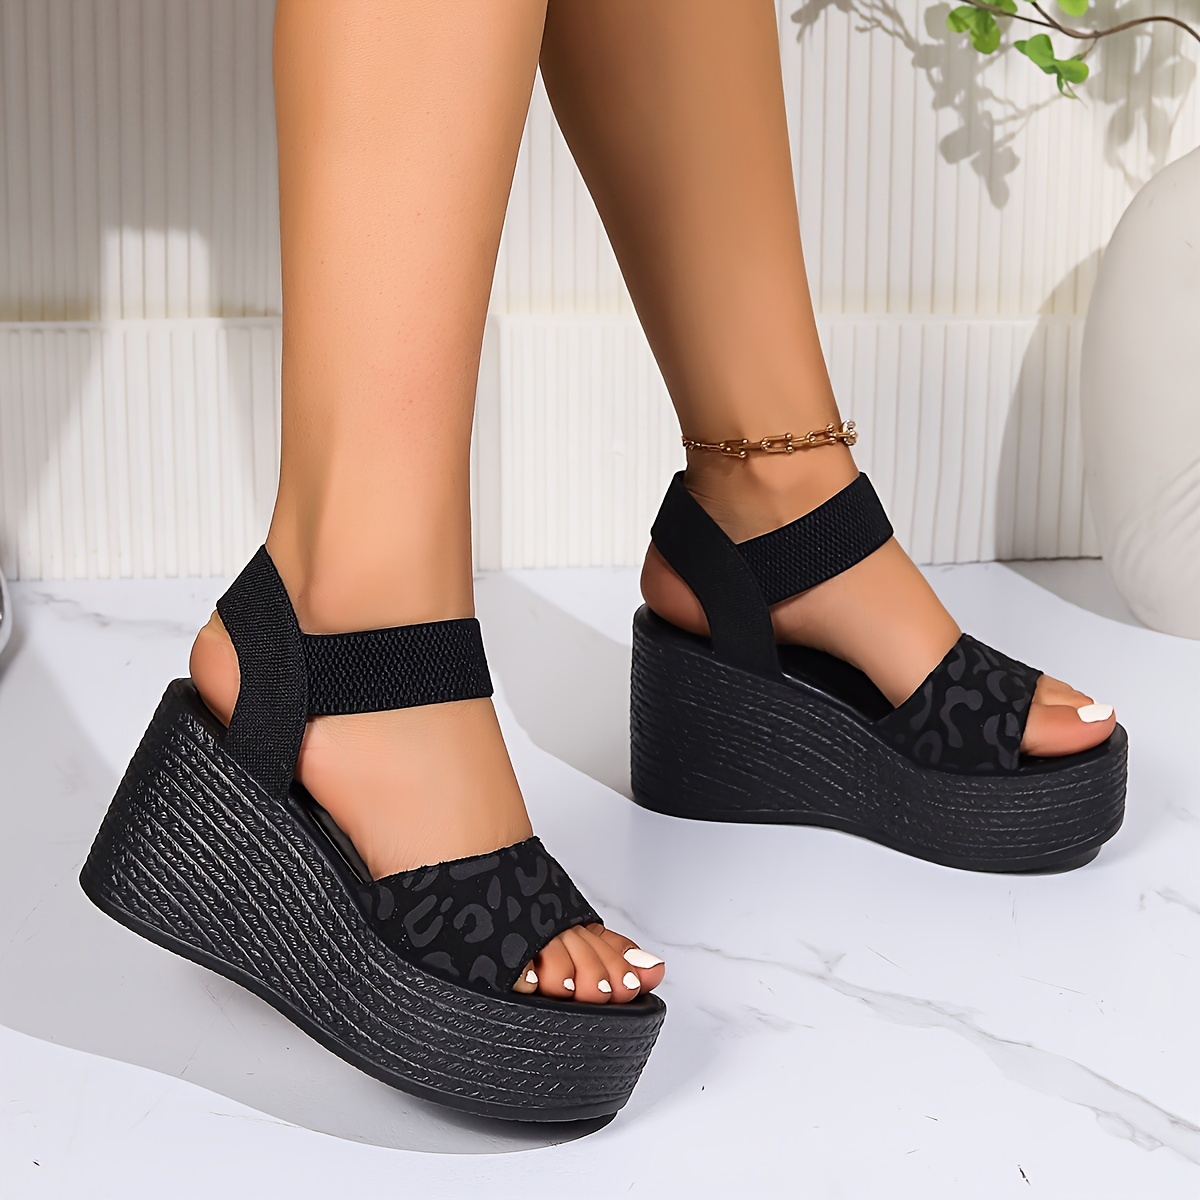 

Women's Elastic Strap Wedge Sandals, Fashion Open Toe Slip On Platform Heels, Casual Going Out Sandals